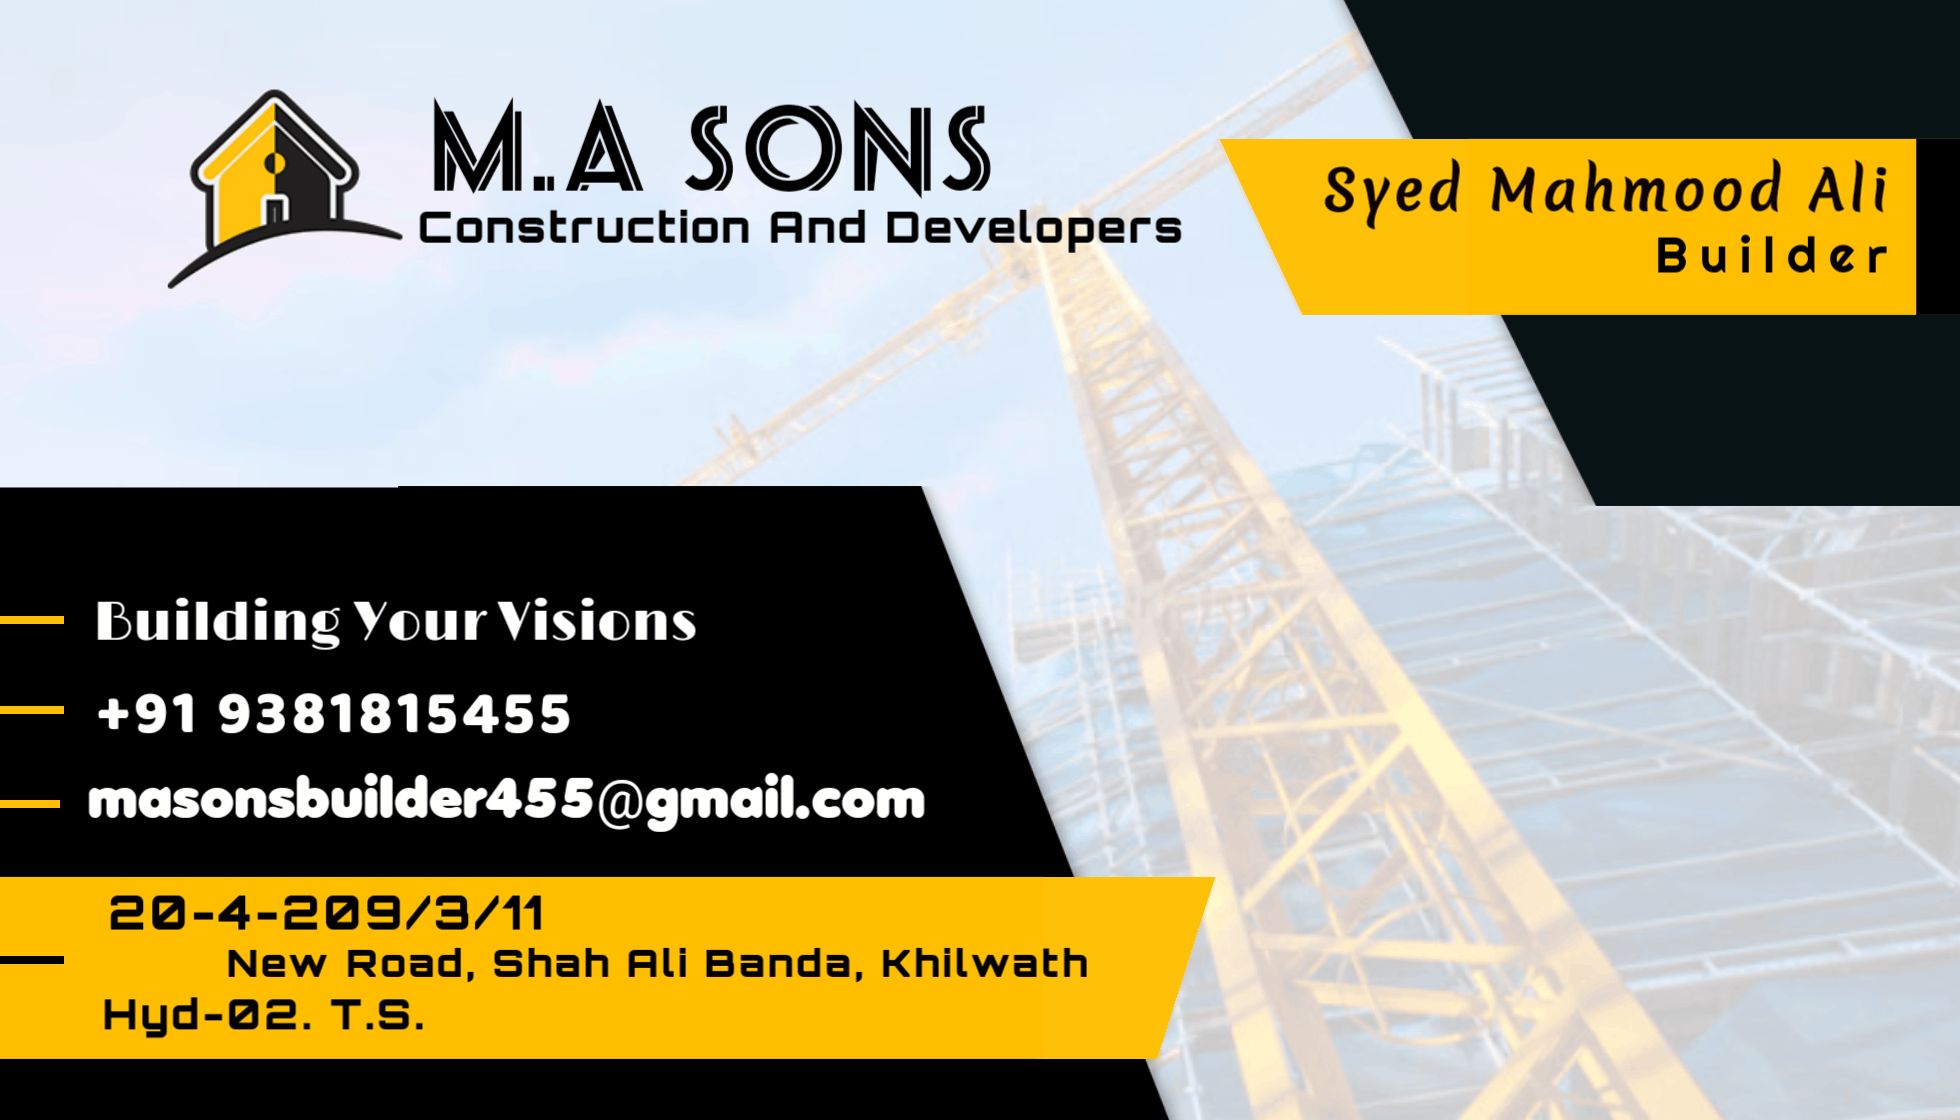 Plumber, Carpenter, Electrician, Painting/ White washing, Flooring/ Roofing, Mason/ Construction labor, Fencing, Interior design/ decoration, Builders/ Architects, Other construction/ home repair services; Exp: More than 10 year